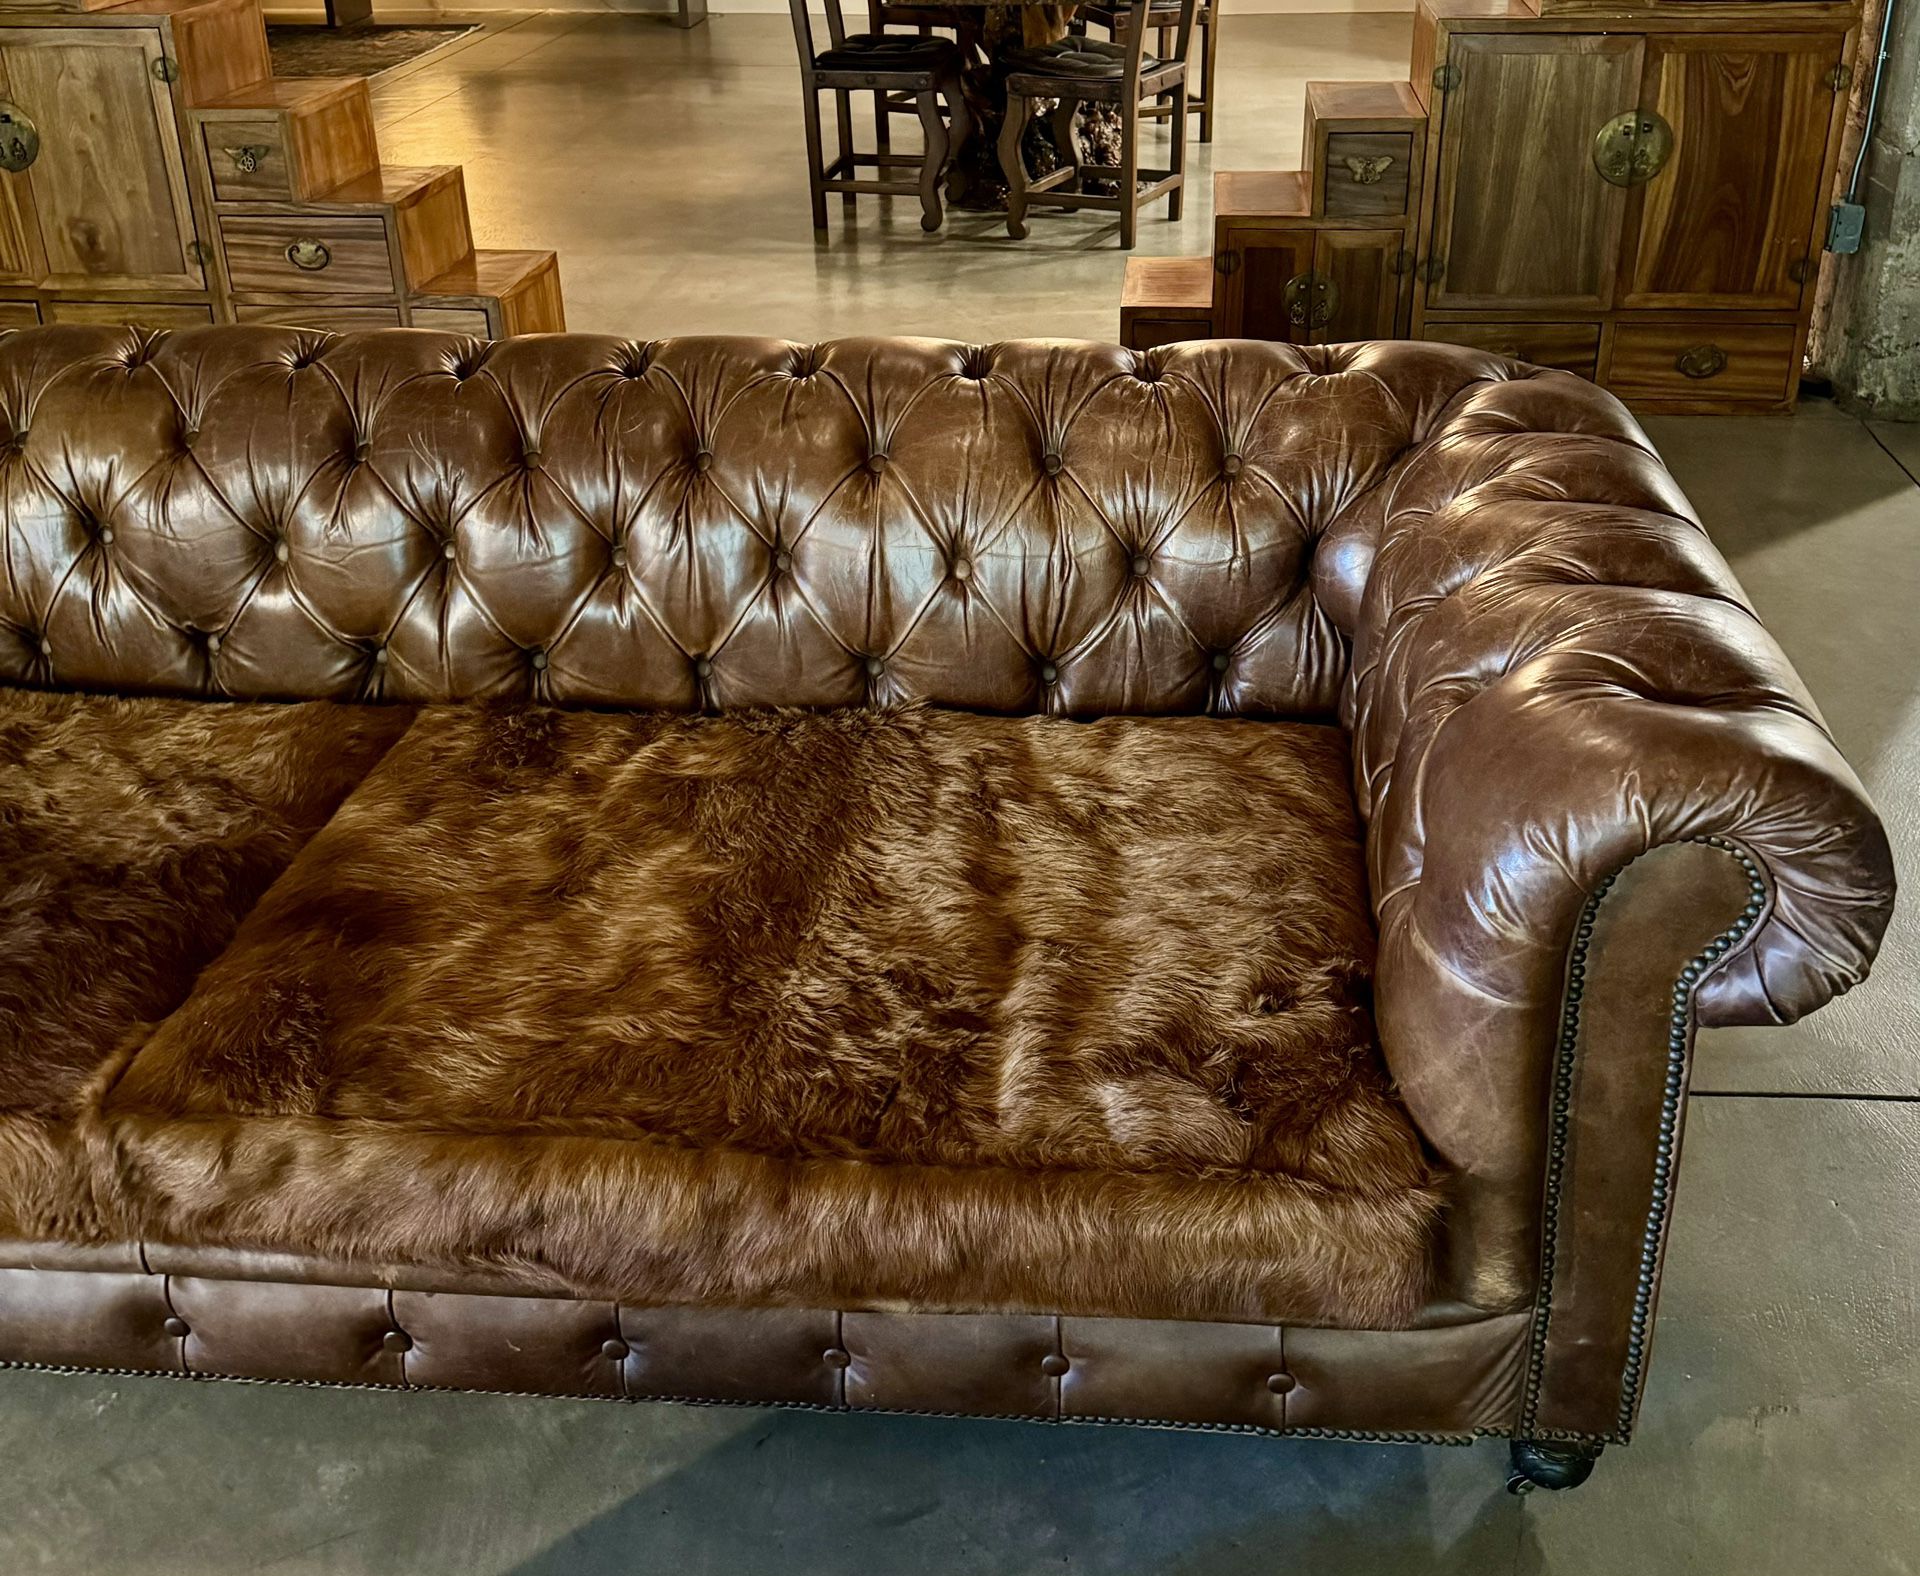 Custom Restoration Hardware Leather Couch With Fur Cushions